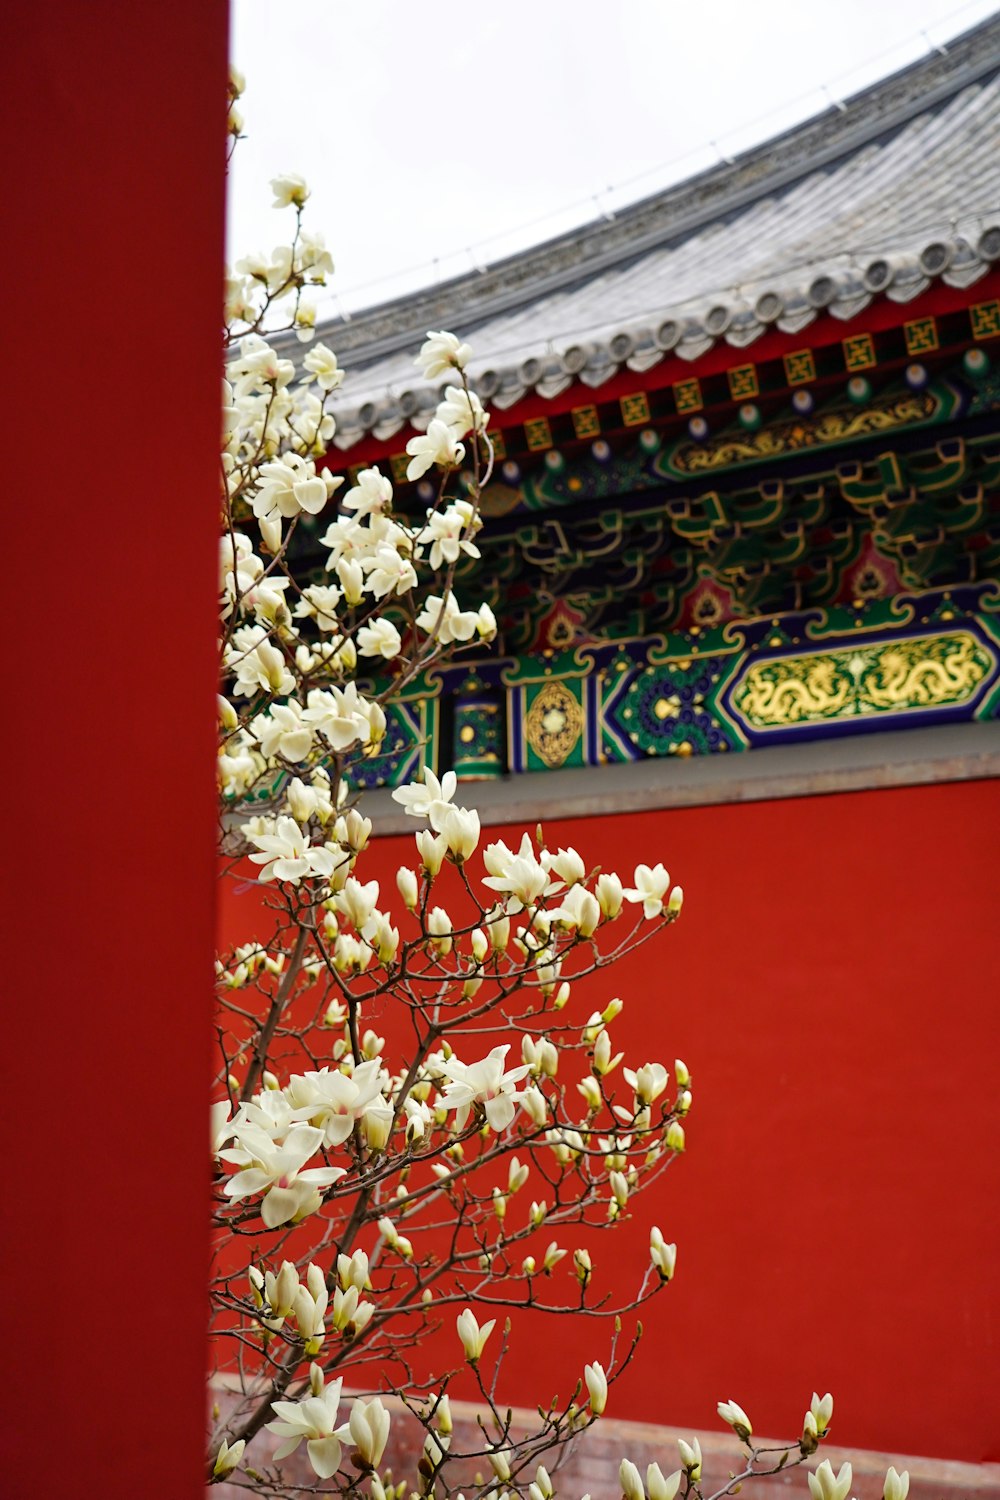 a wreath of white flowers in front of a red wall